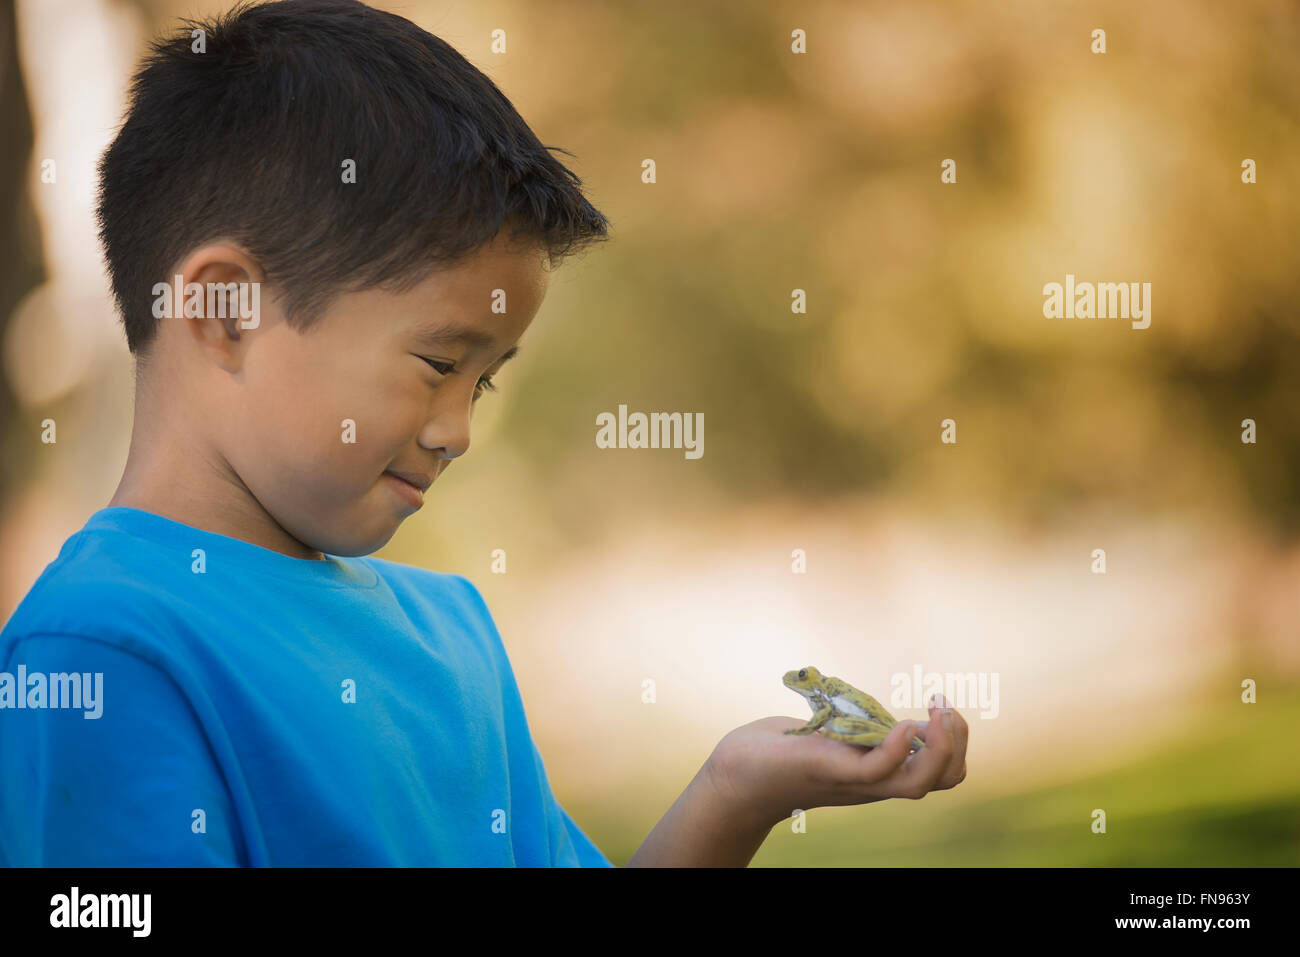 A boy holding a frog in the palm of his hand. Stock Photo